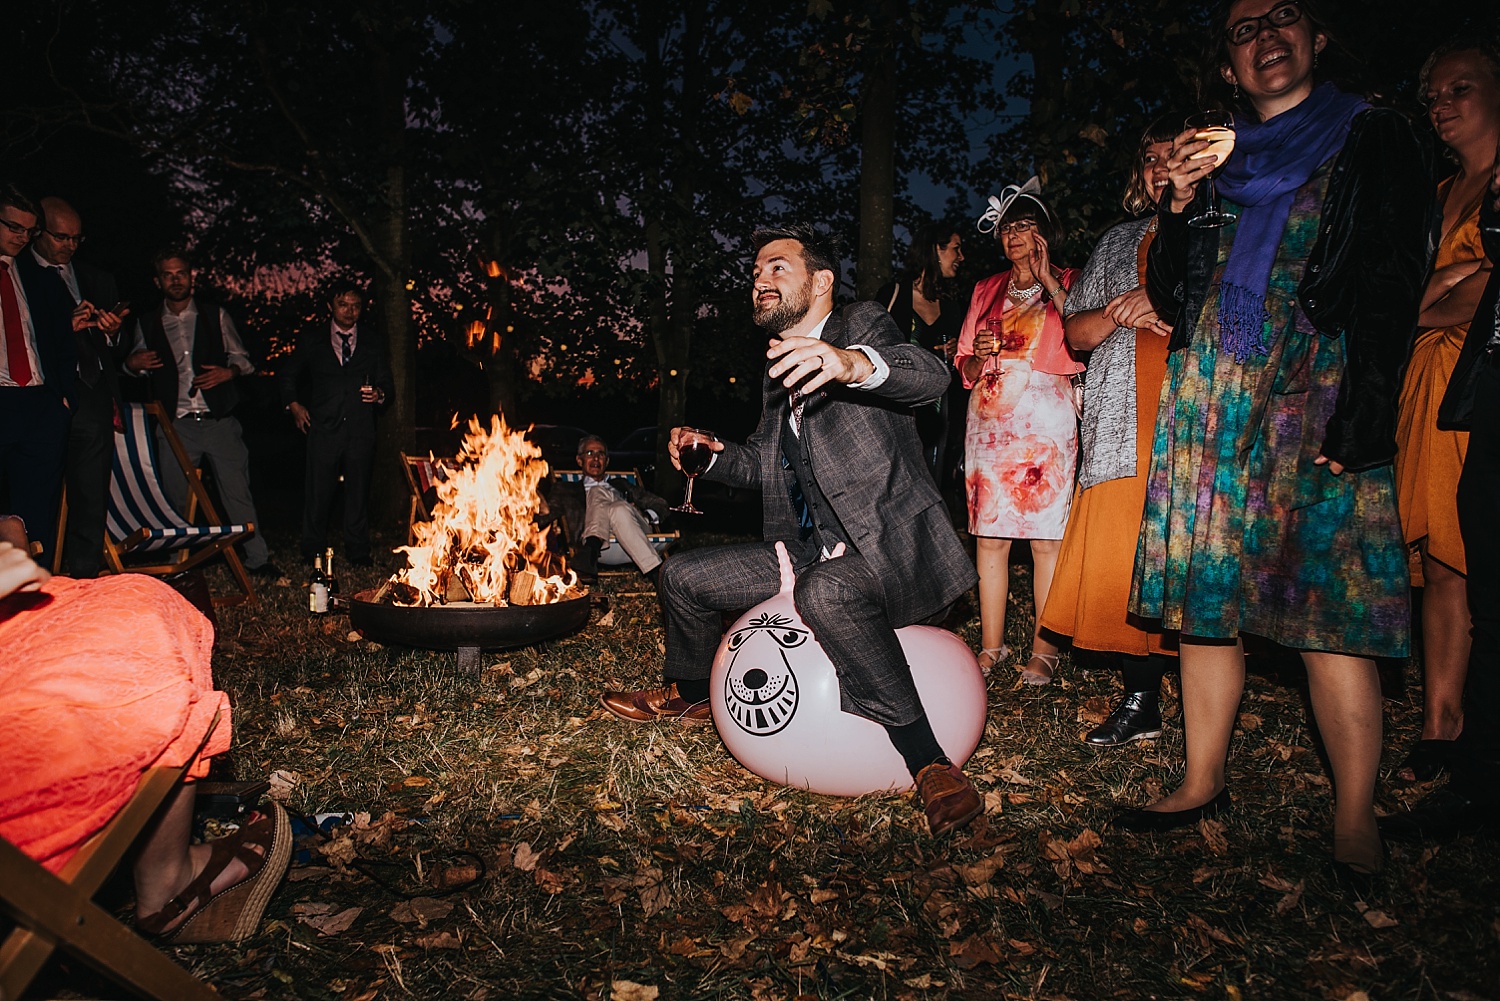 groom bouncing on space hopper by firepit at Stanlake Park